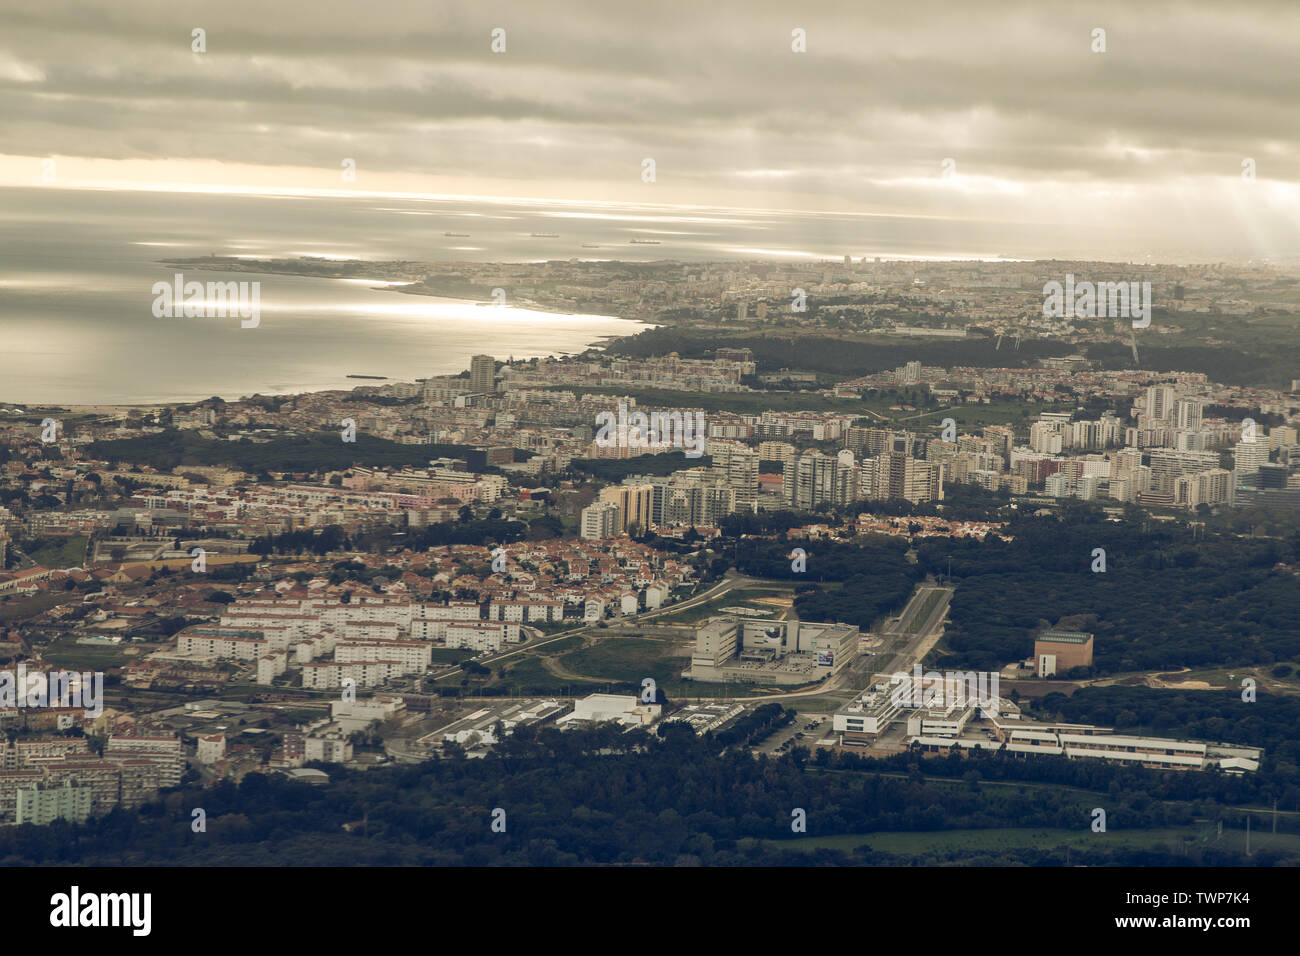 Portuguese capital Lisbon from above. City skyline with clouds in the sky. Buildings and mouth of the river name Tejo with landscape and ships on the Stock Photo